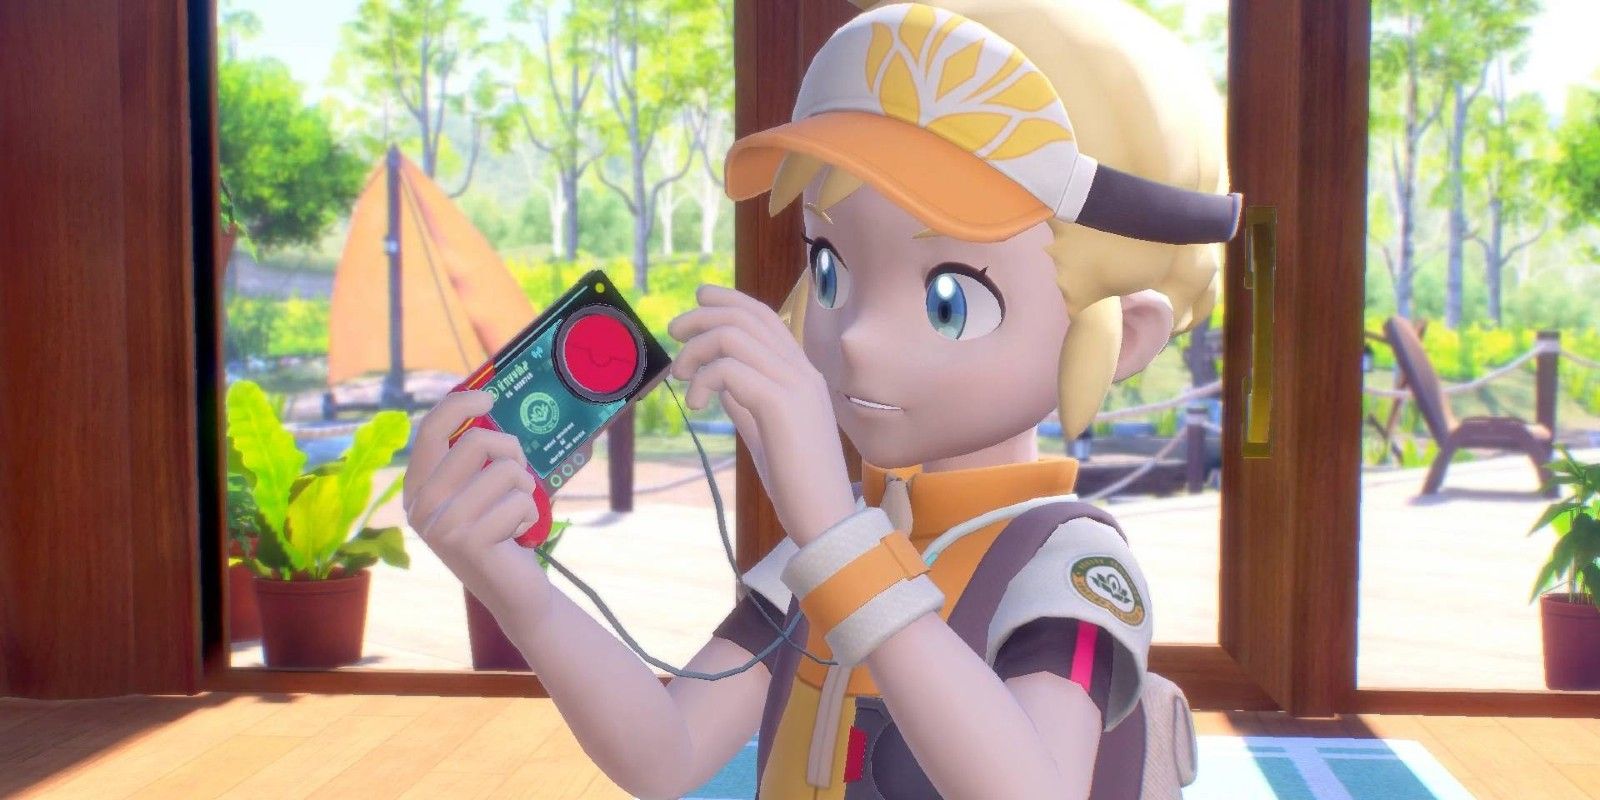 A player receives the research camera in New Pokémon Snap